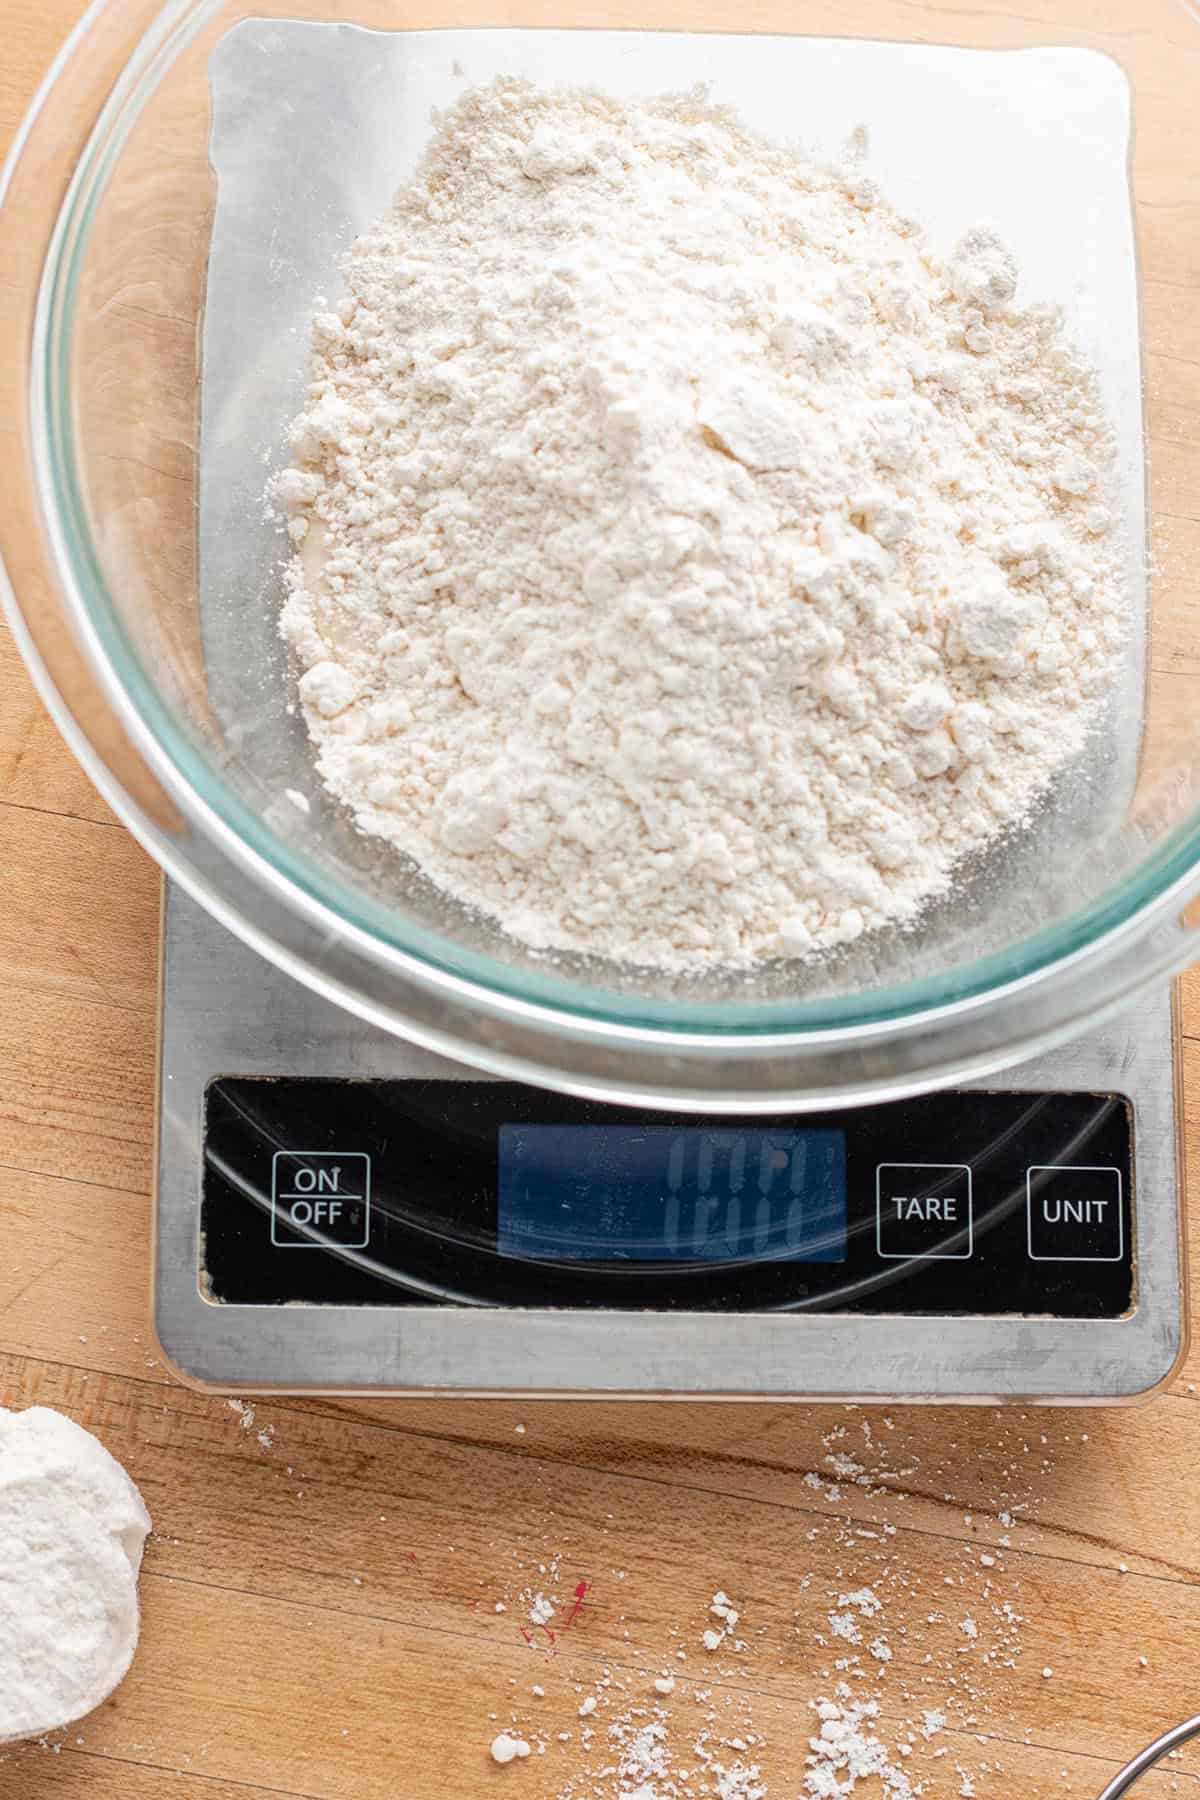 A digital scale measuring out 100grams of flour in a glass bowl.